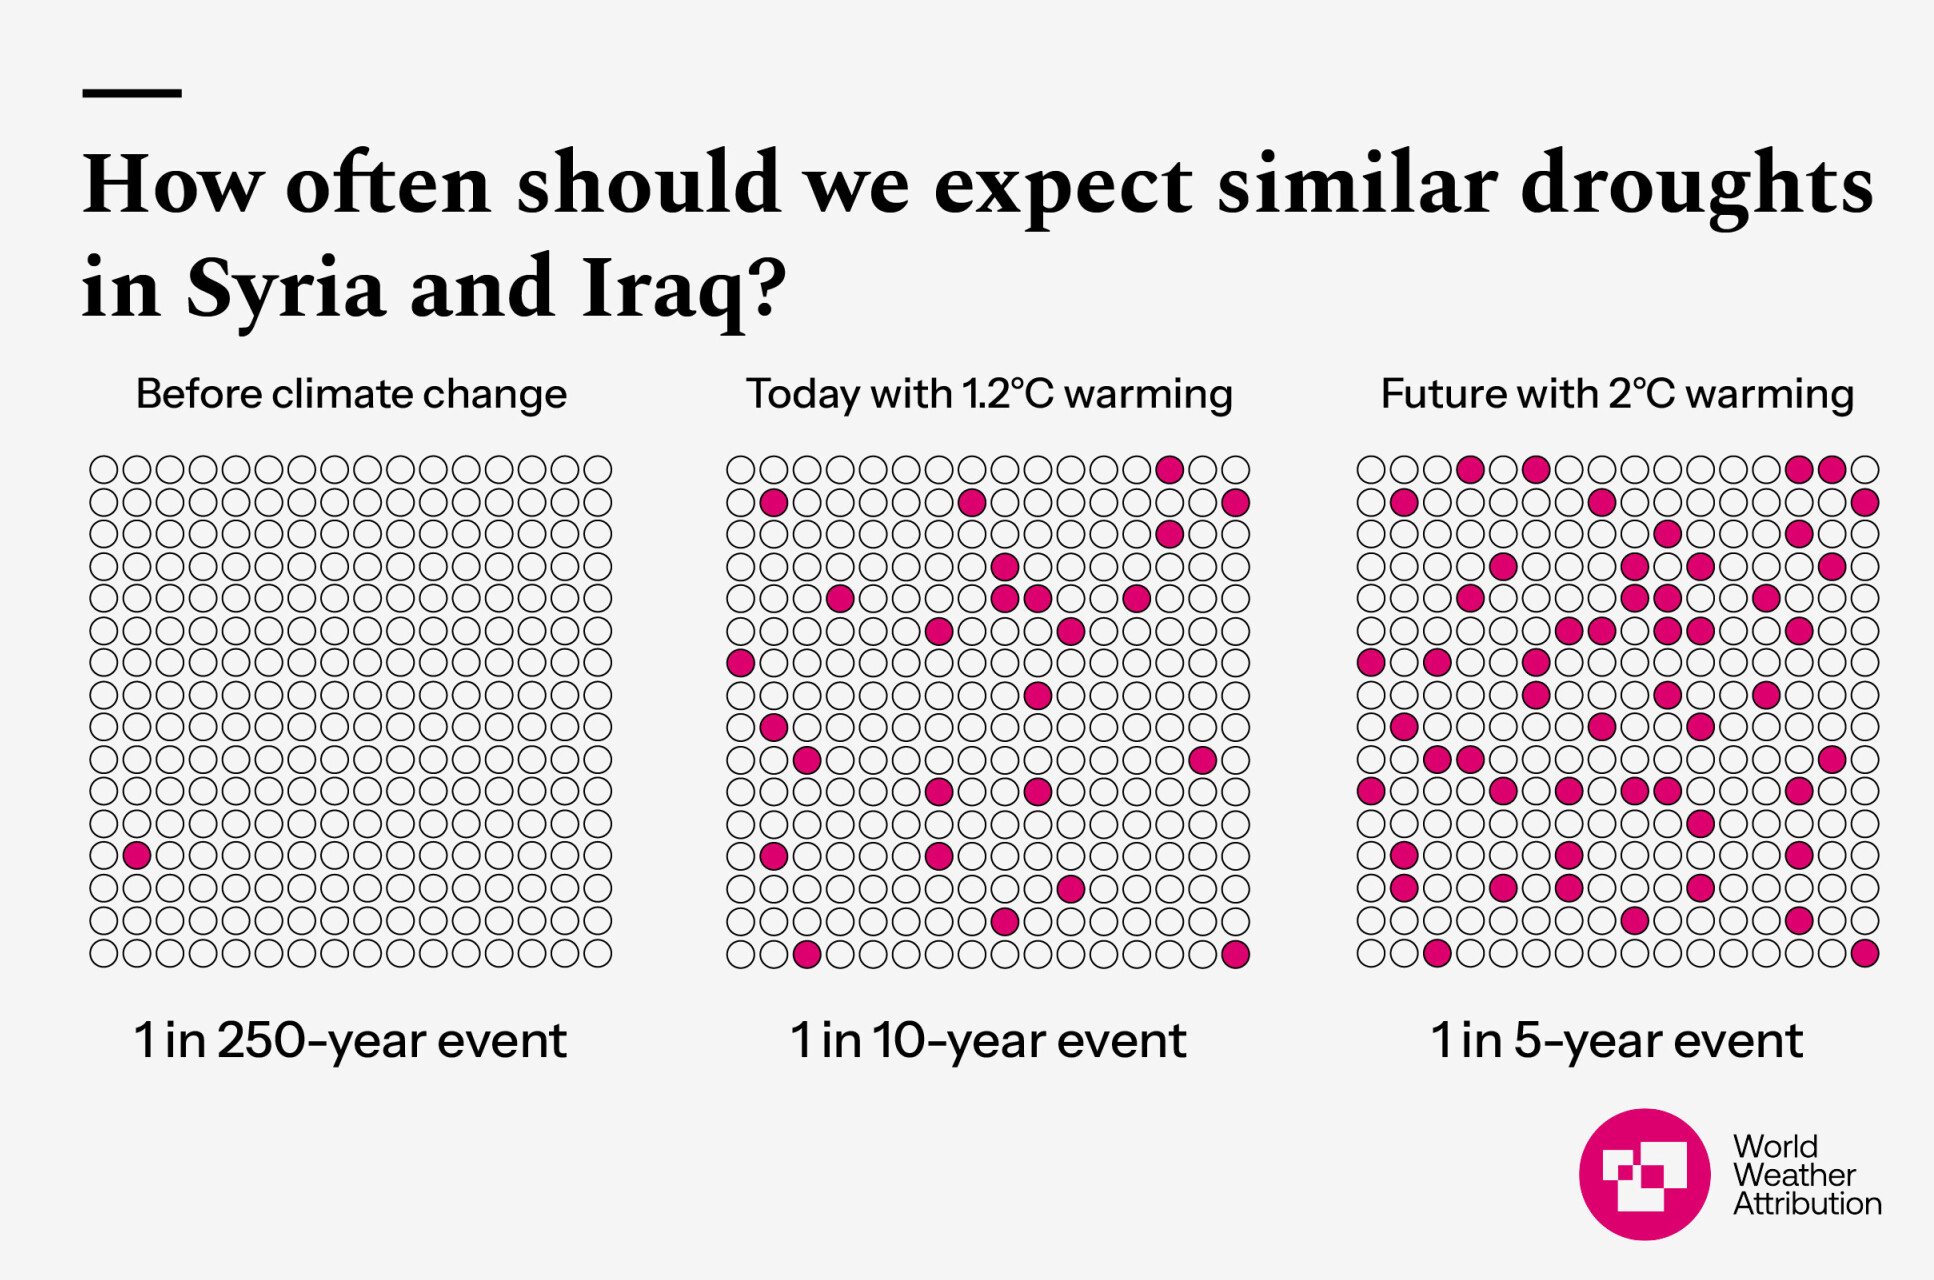 A graph showing the changing likelihood of drought in Syria and Iraq due to climate change.